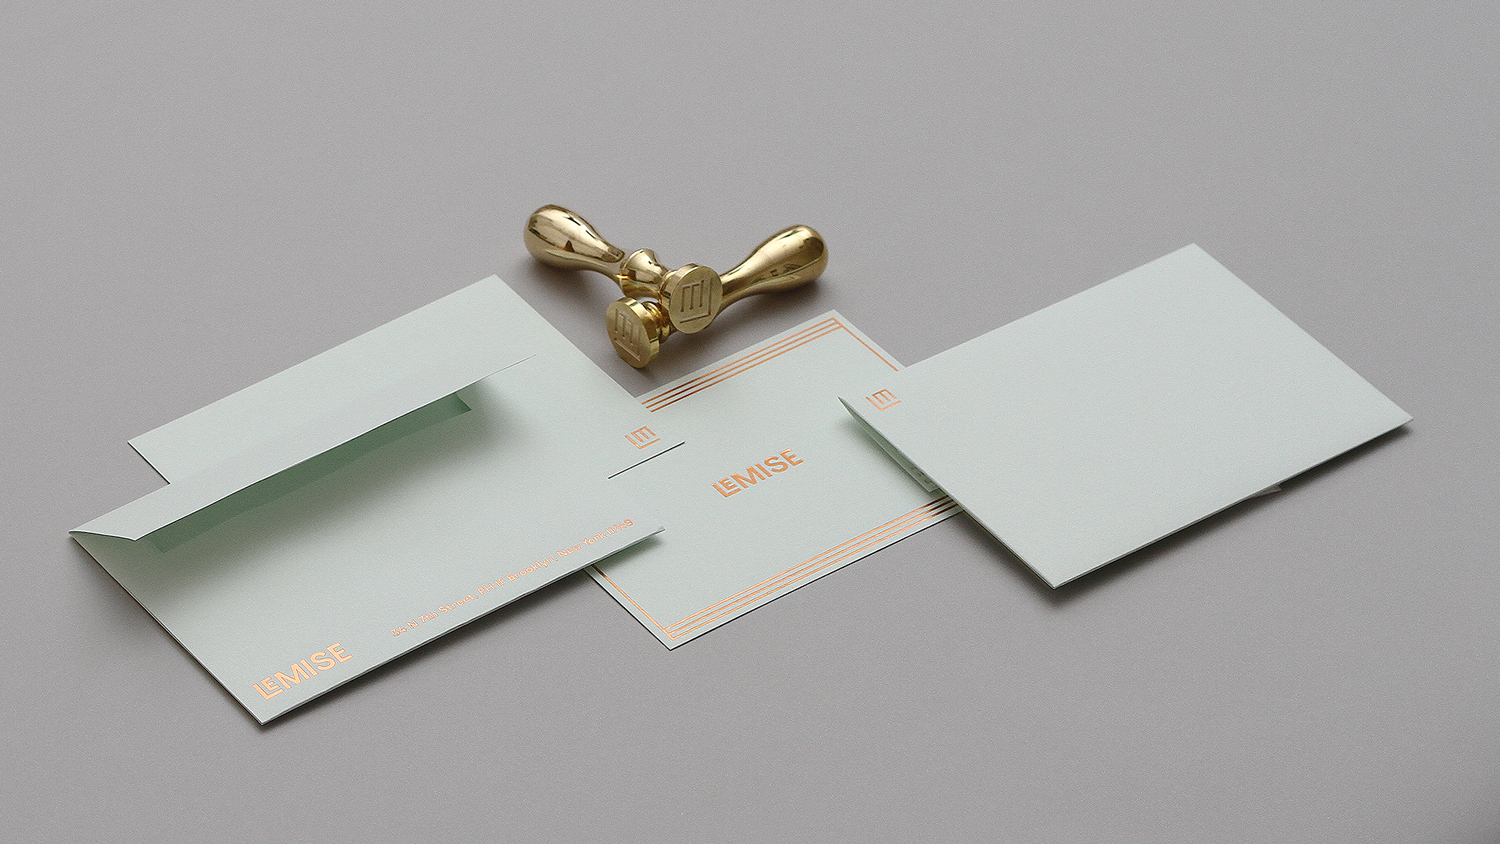 Brand identity and pastel coloured paper and coper block foil stationery for Brooklyn based art and design advisory business LeMise by DIA